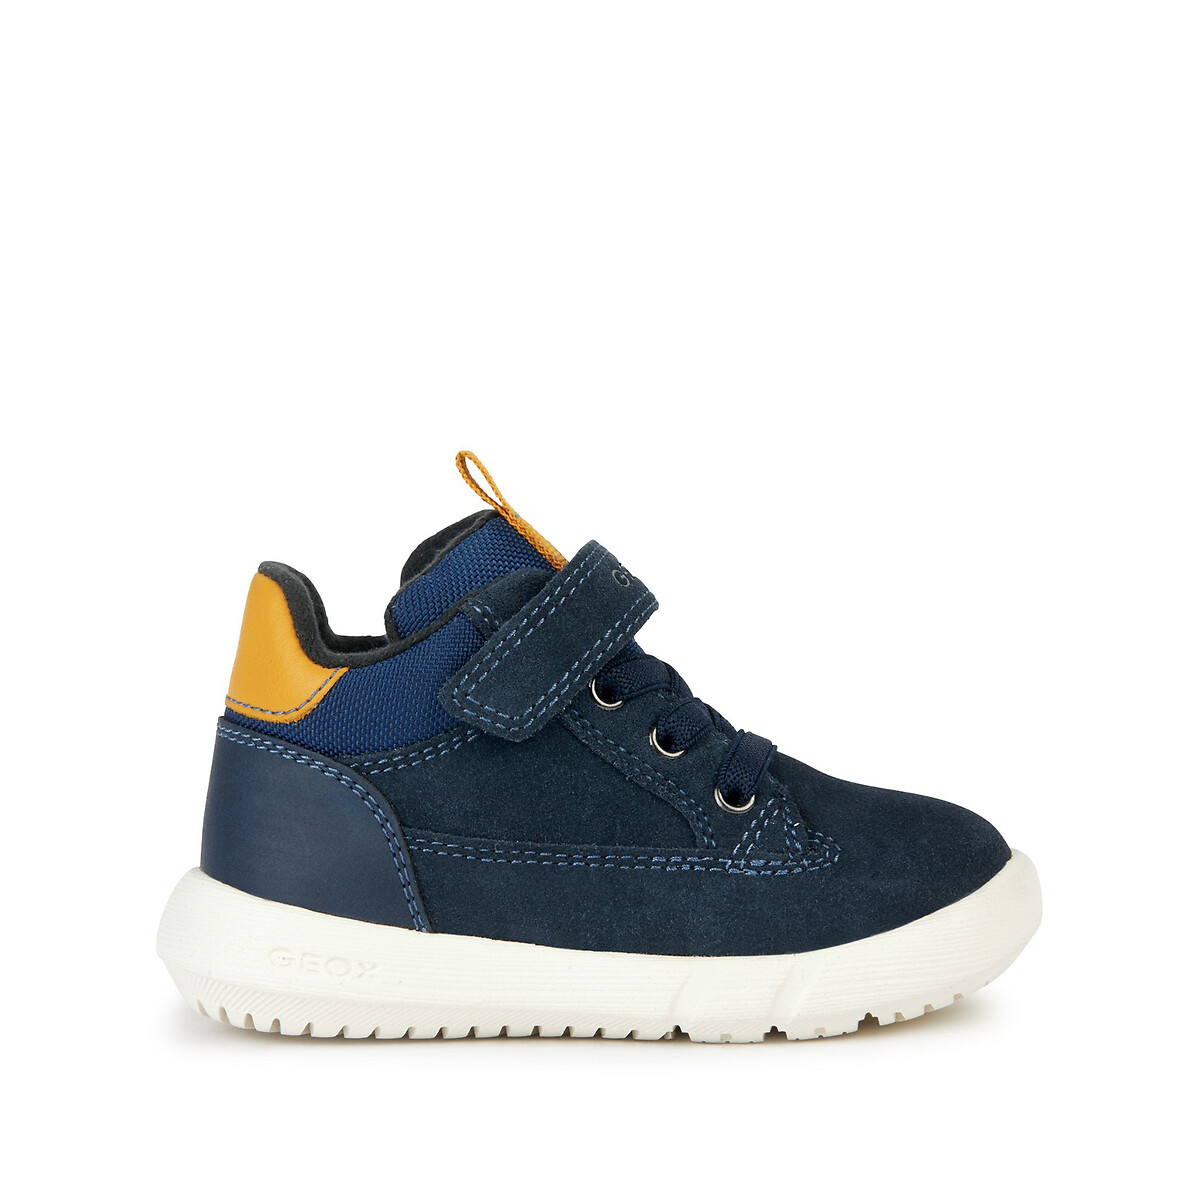 Image of Kids Hyroo Suede High Top Trainers with Touch 'n' Close Fastening